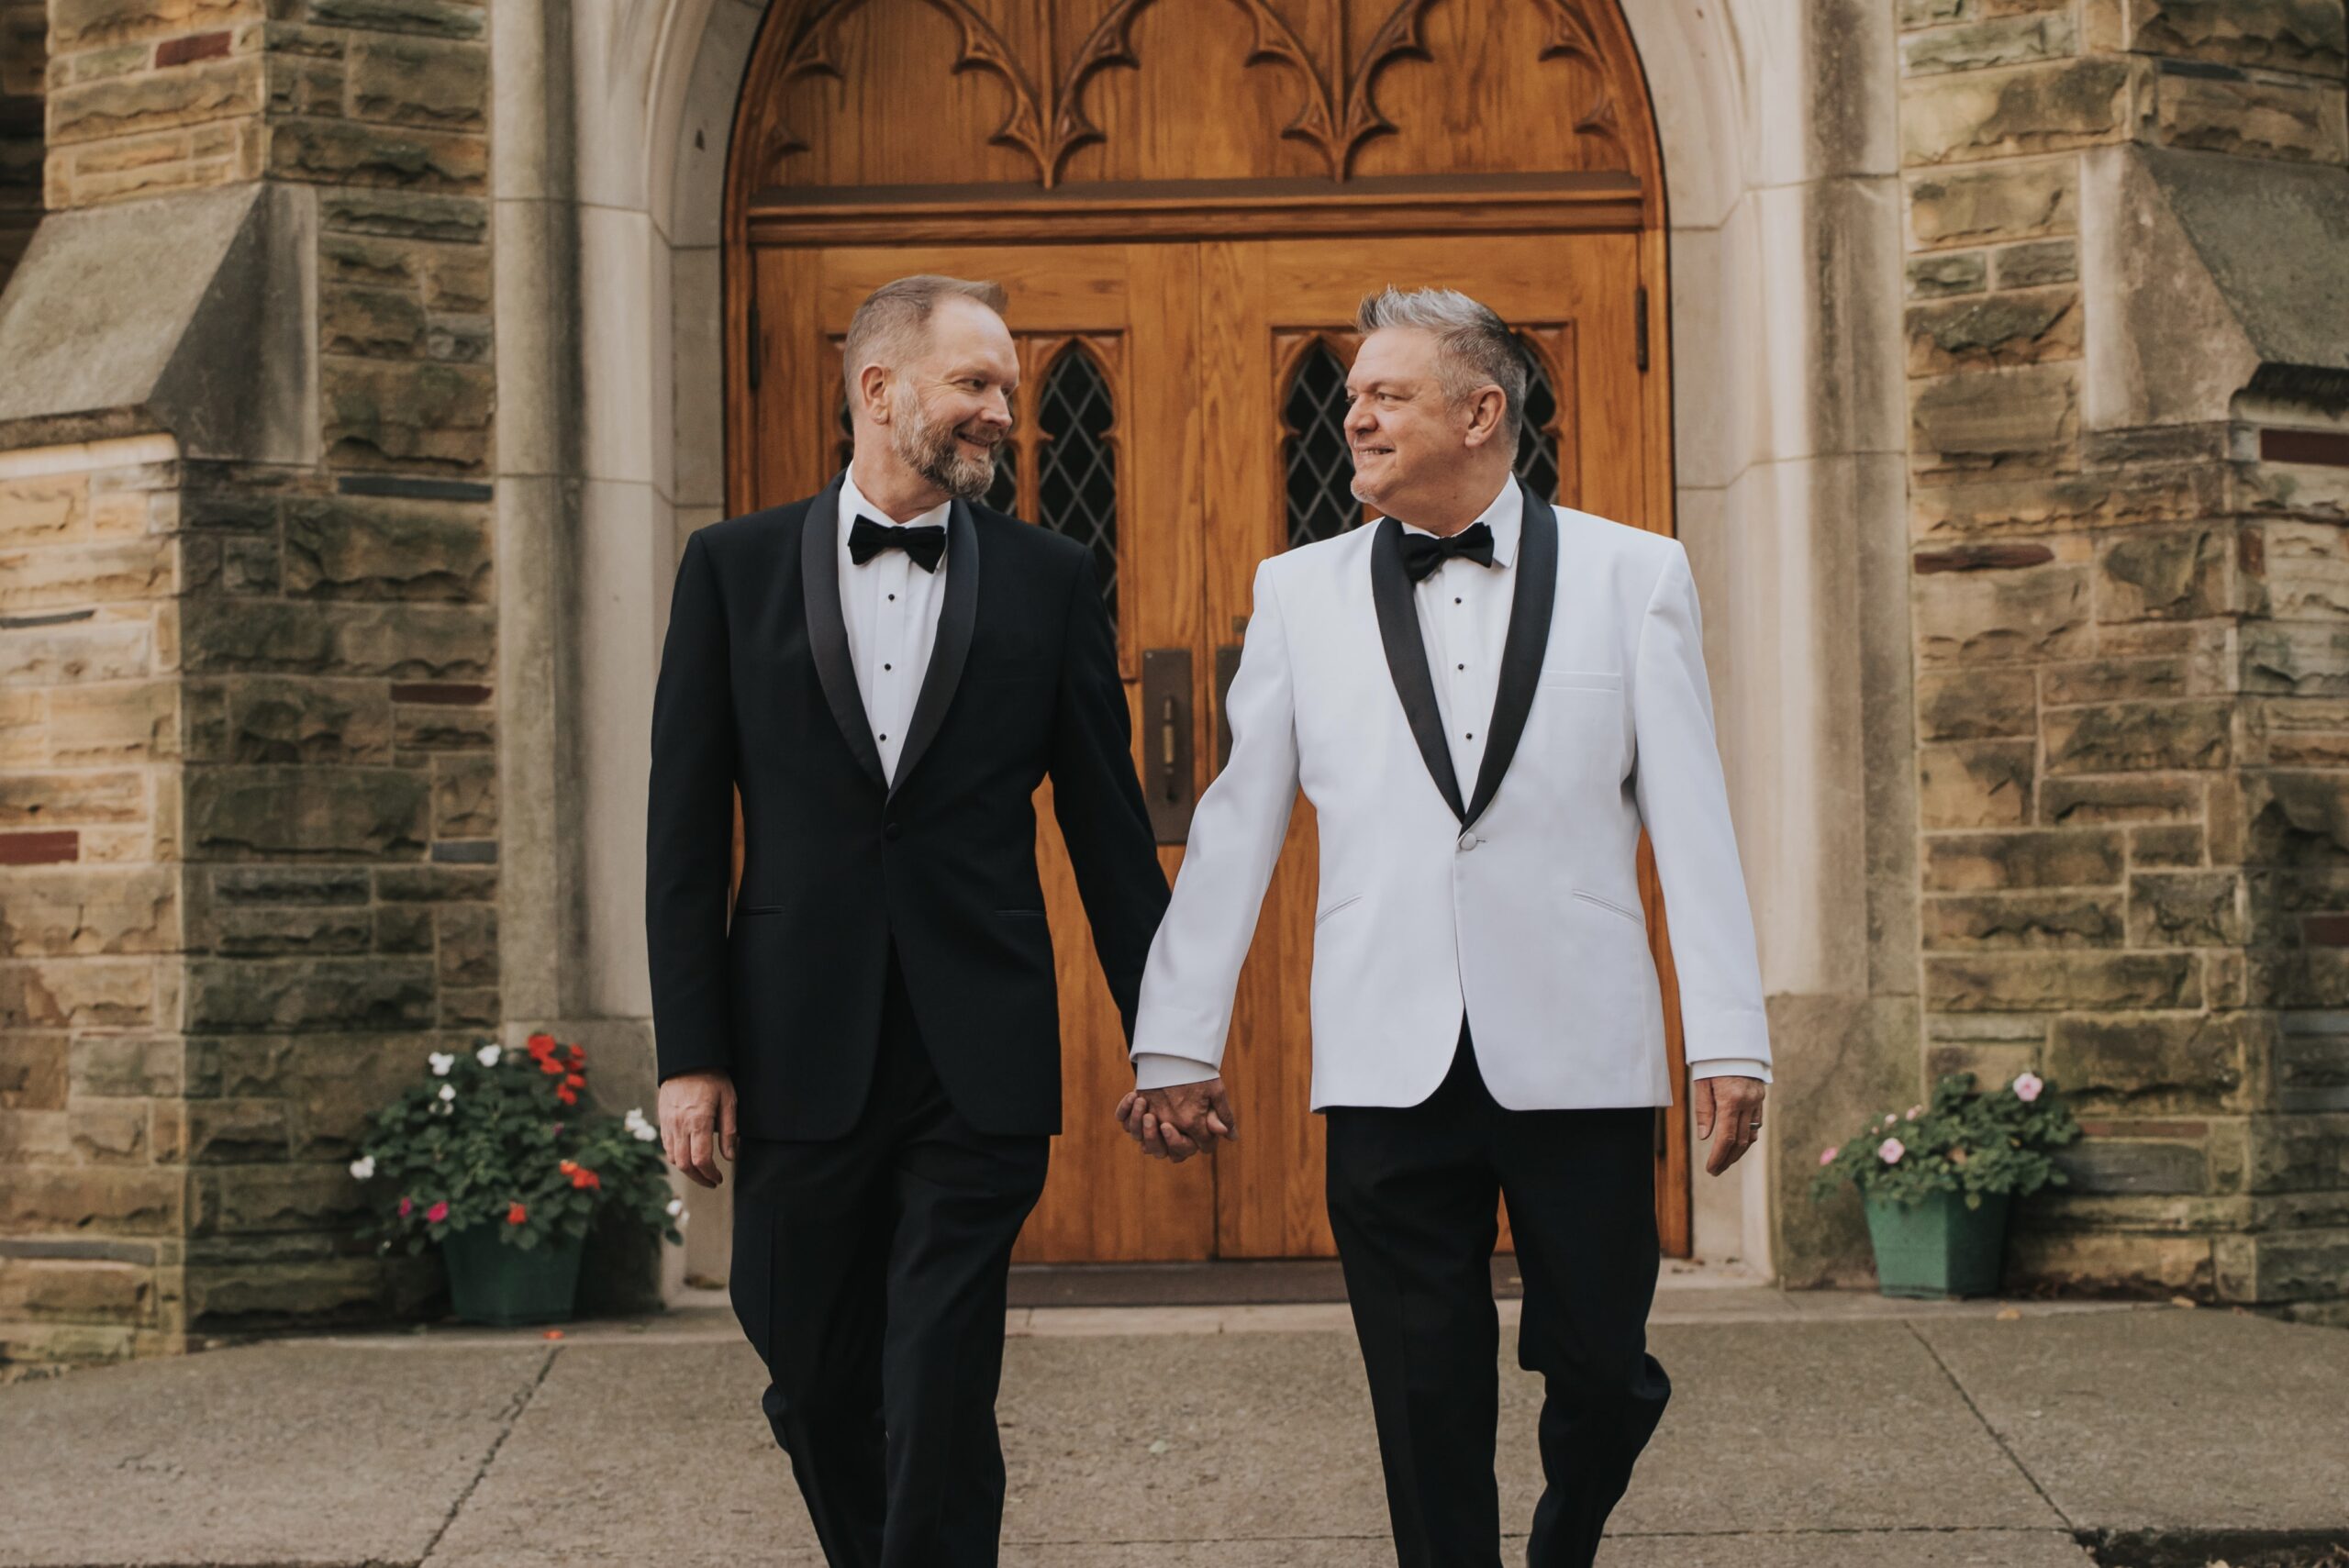 Grooms in tuxes walking on campus on their wedding day